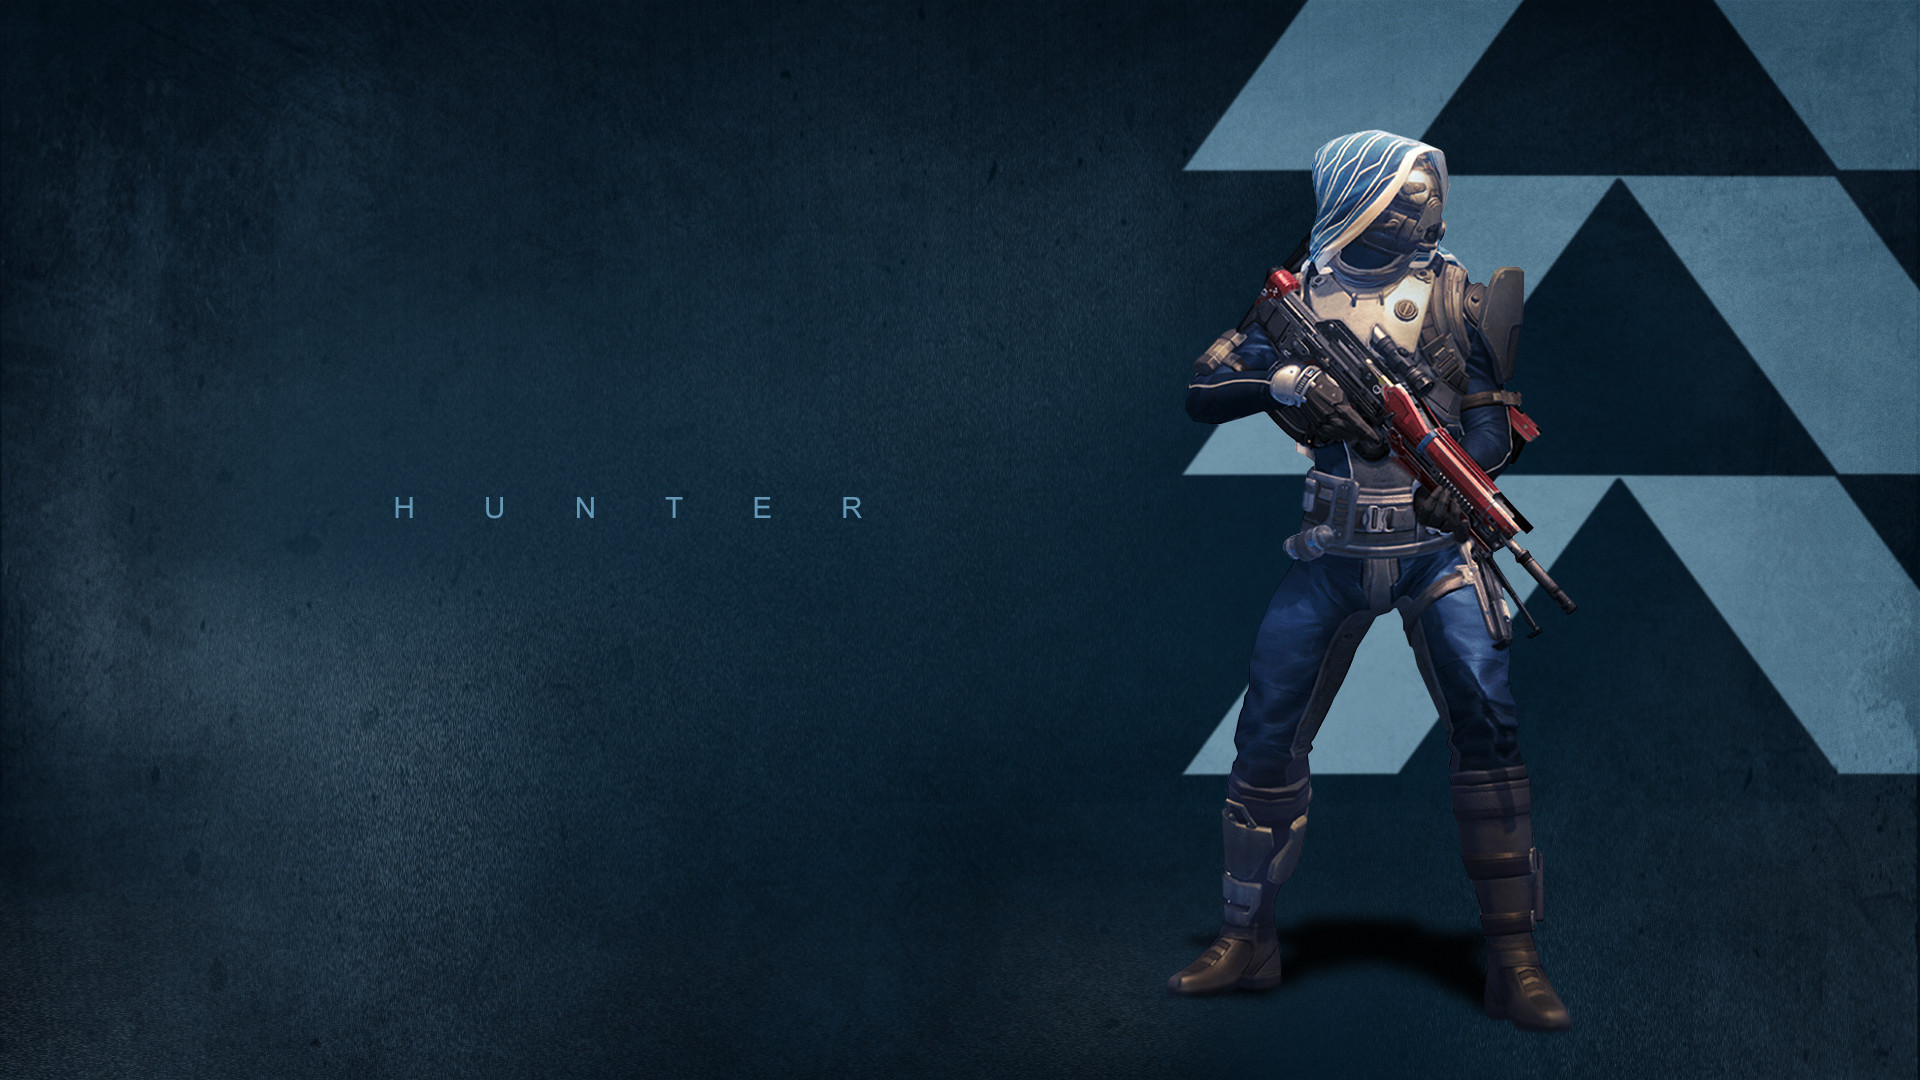 1920x1080 Photo Collection Destiny Hunter Hd Wallpapers Iphone